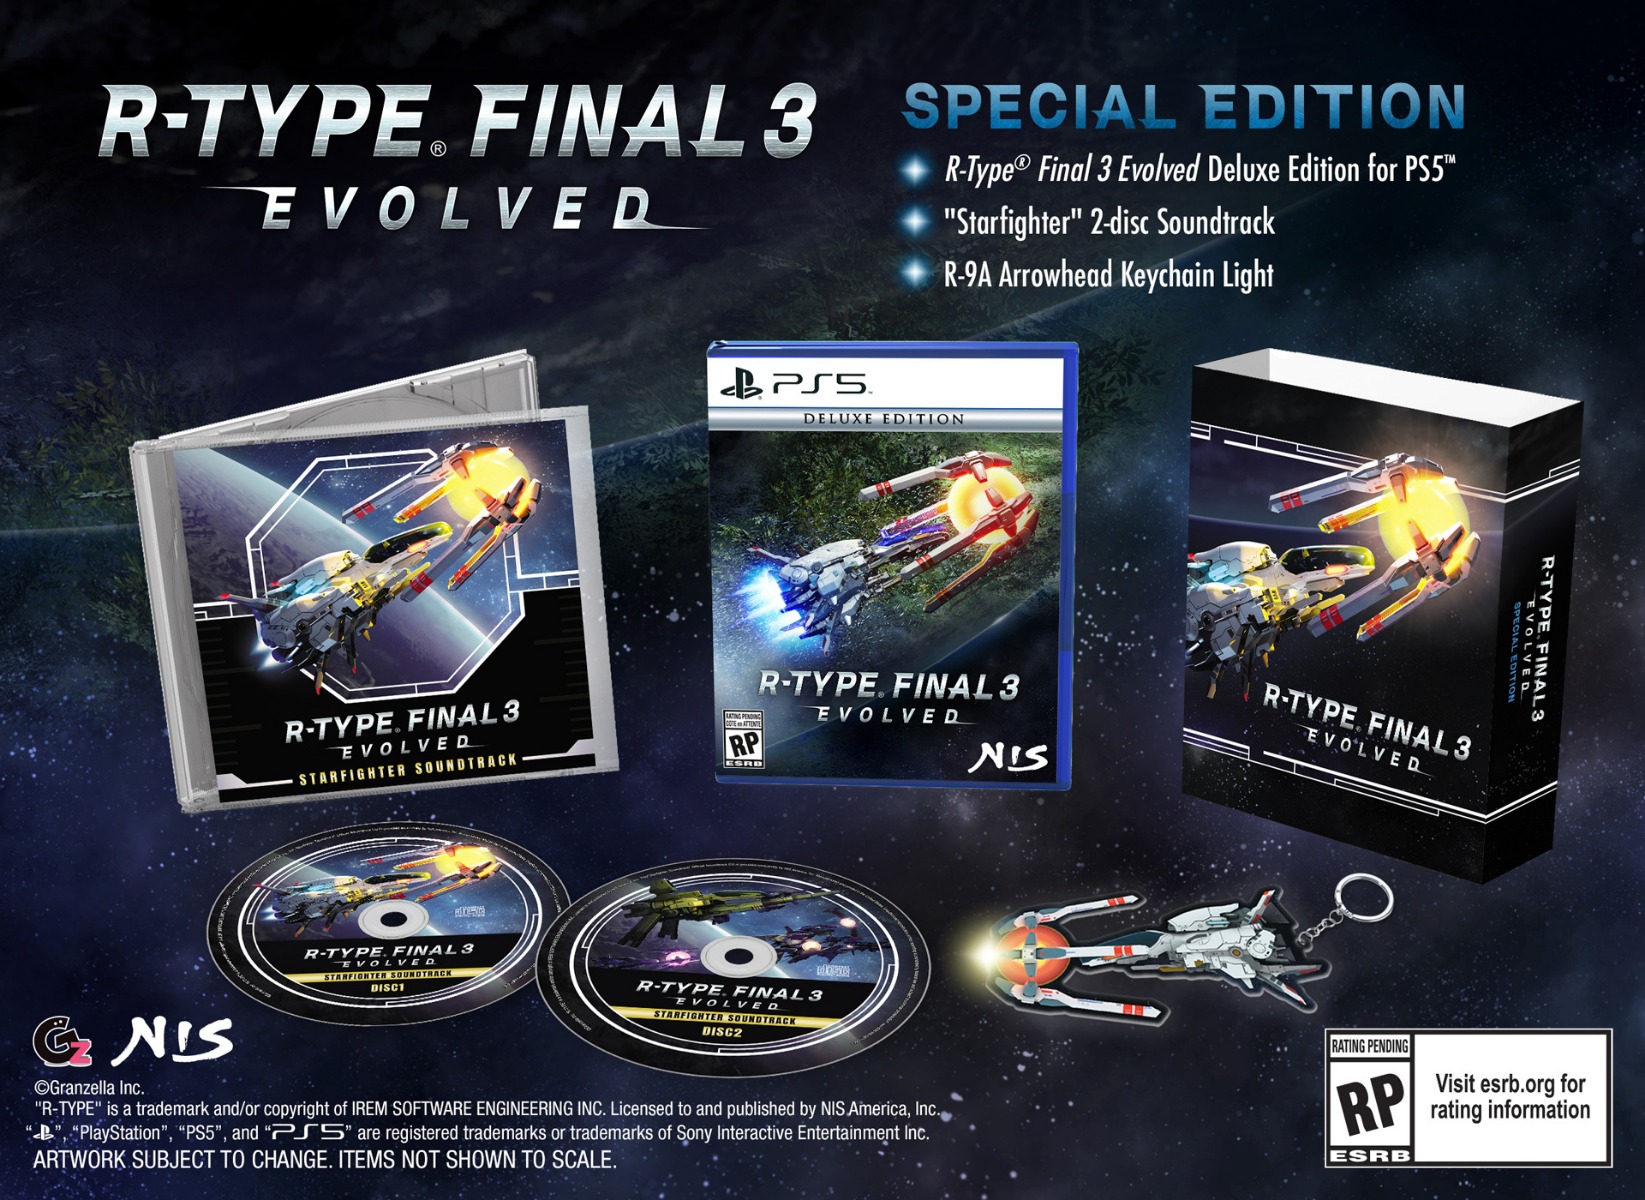 R-Type Final 3 Evolved - Special Edition